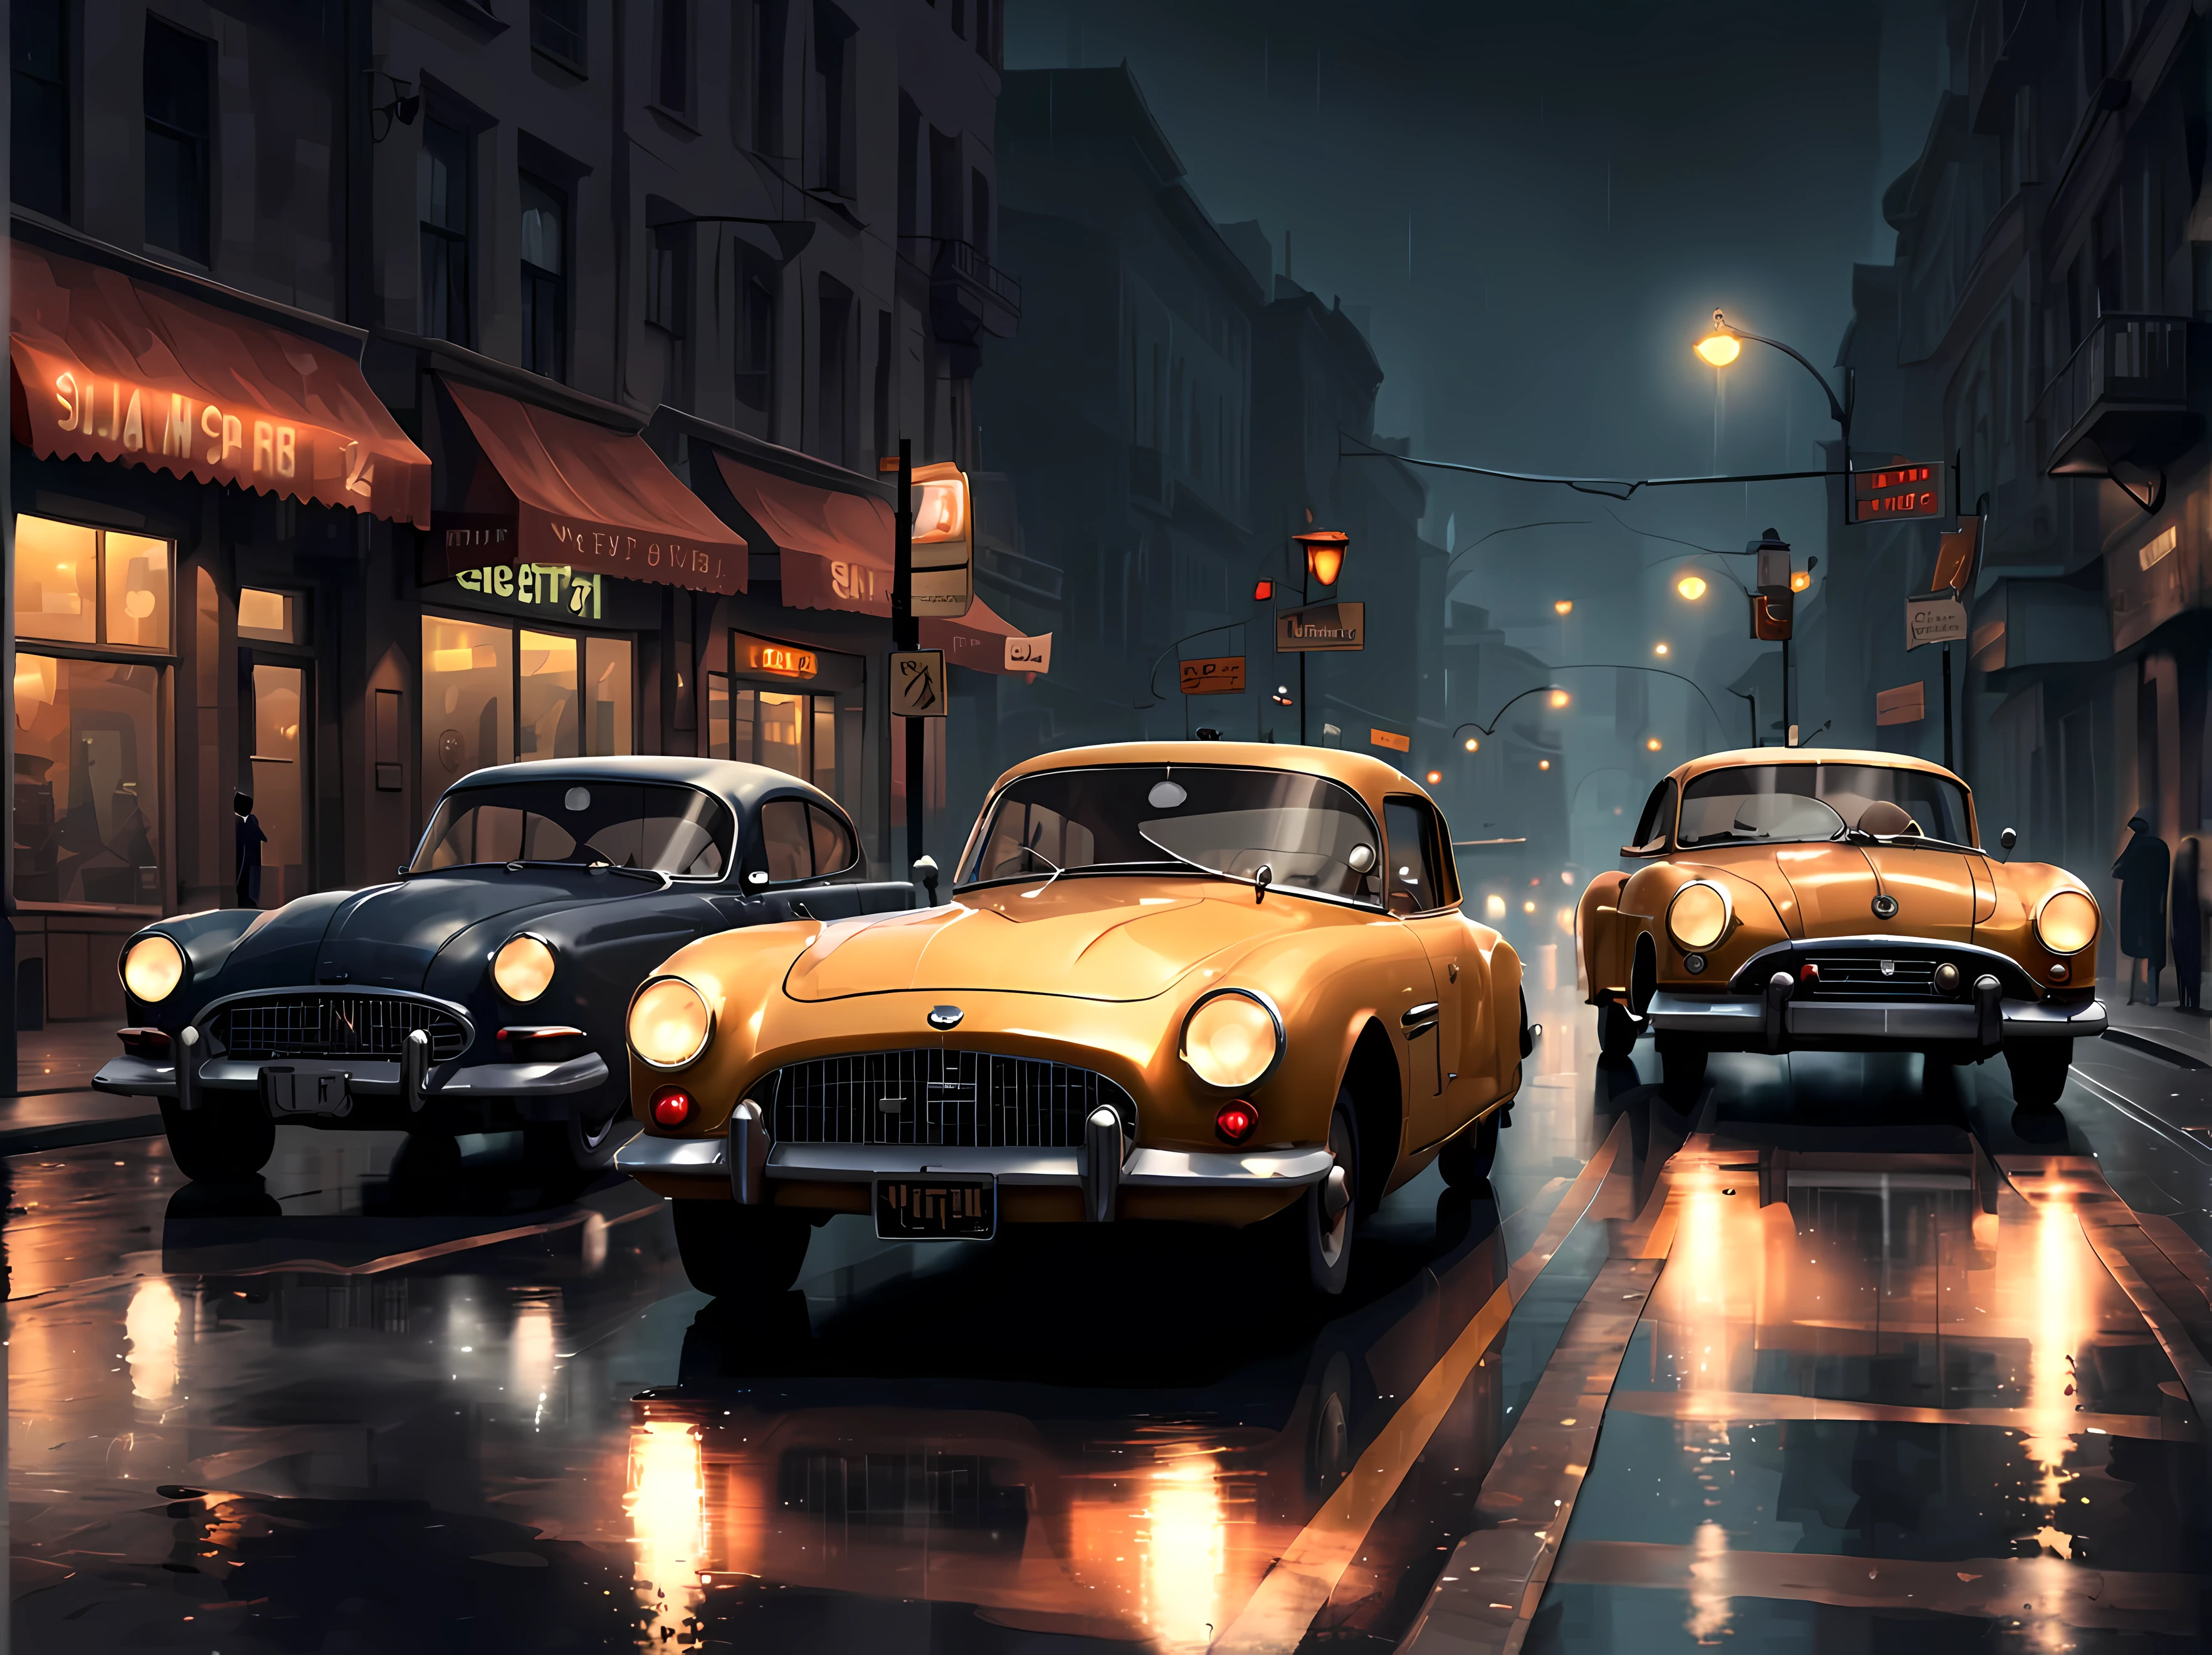 (pixel style:1.4), masterpiece in maximum 16K resolution, design a captivating thrilling car ((chase)) between two ((vintage)) cars ((sleek curves, classic design)) in the atmospheric style of film noir, the scene unfolds on rain-soaked streets illuminated by the harsh glow of streetlamps, capturing the tension and adrenaline of a high-speed pursuit. | A dark and shadowy urban environment, glistening reflections on the wet pavement. | ((More_Detail))